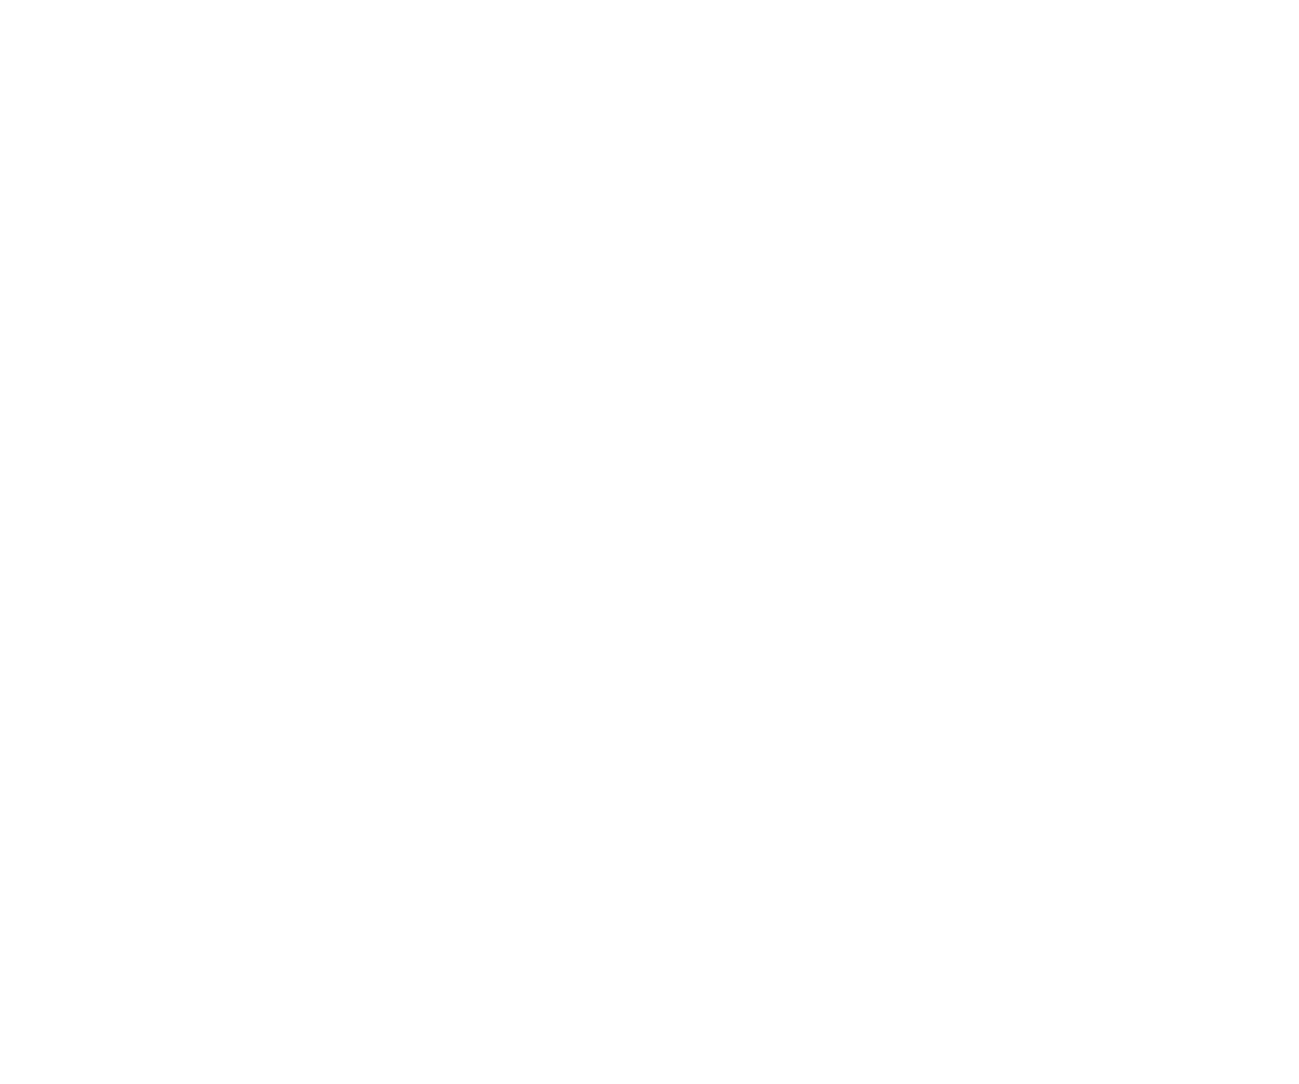 The students learn to separate their rubbish, including food waste, plastics and paper/cardboard, with bins situated ...